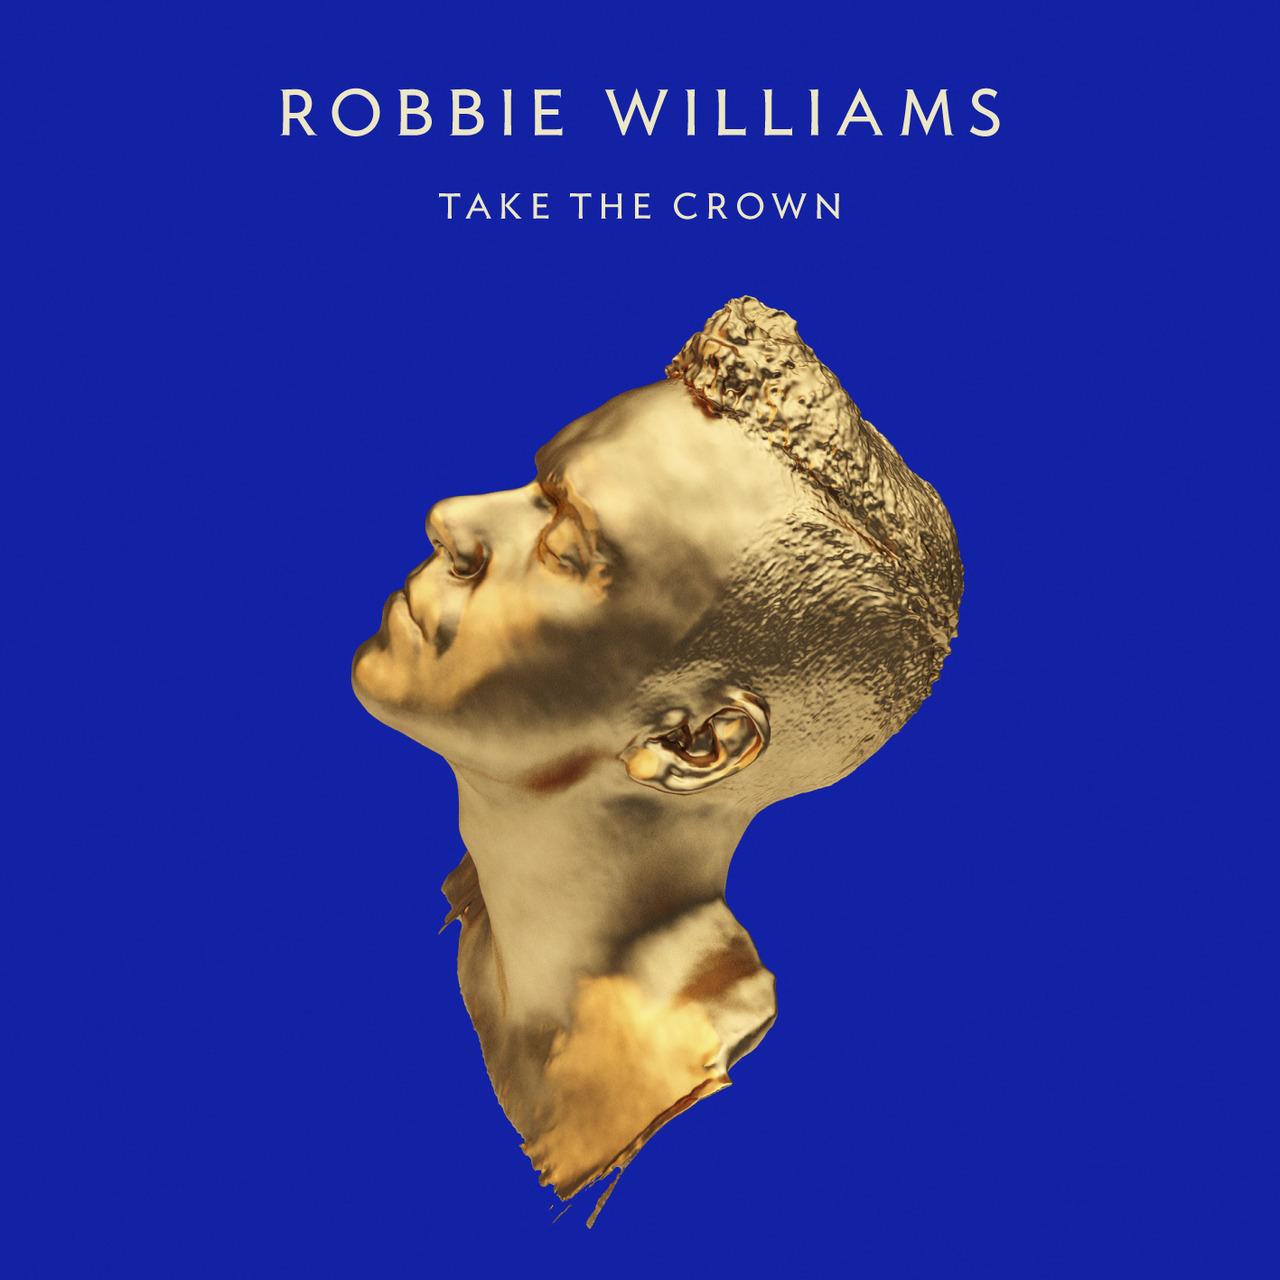 Pre-order Take The Crown now!